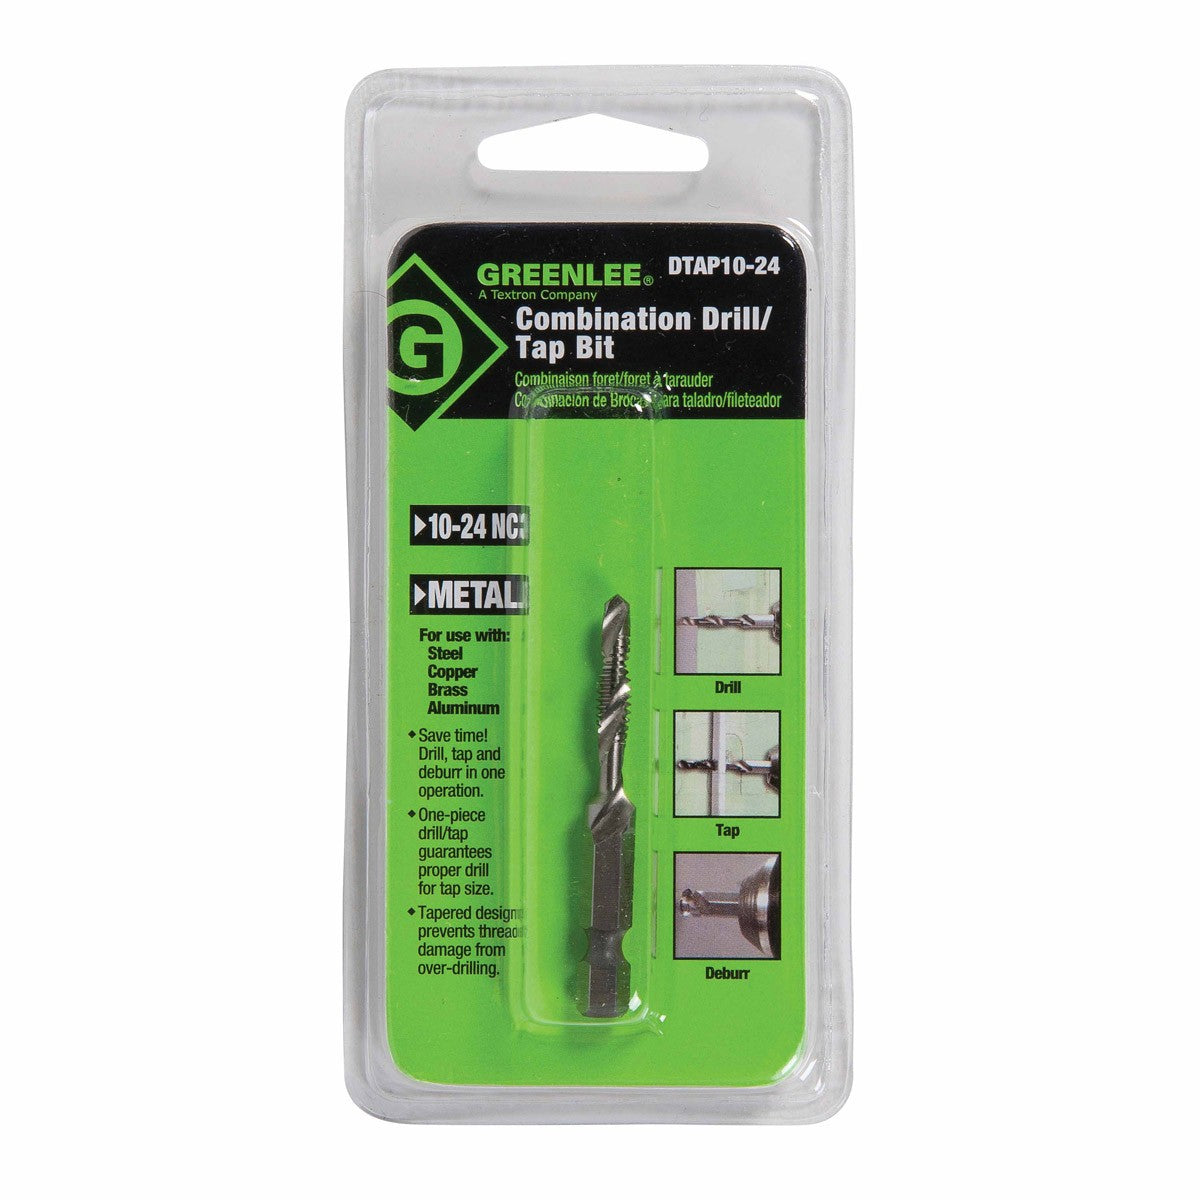 Greenlee DTAP10-24 DRILL/TAP, 10-24